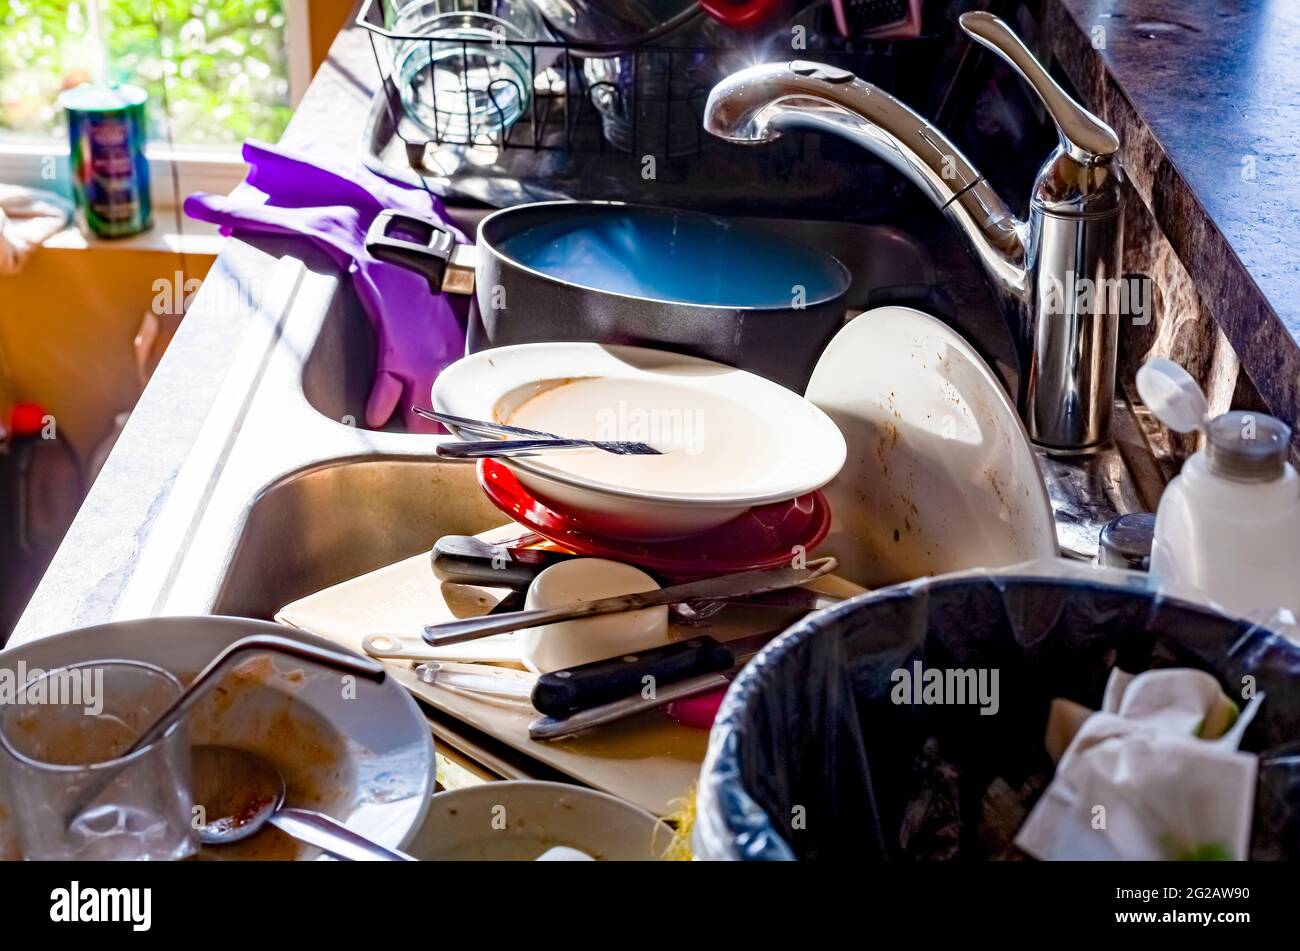 A big pile of dirty dishes, pots, utensils stacked into kitchen sink. Concept image for hand washing dishes, mess in kitchen, chores, eyesore. Common Stock Photo